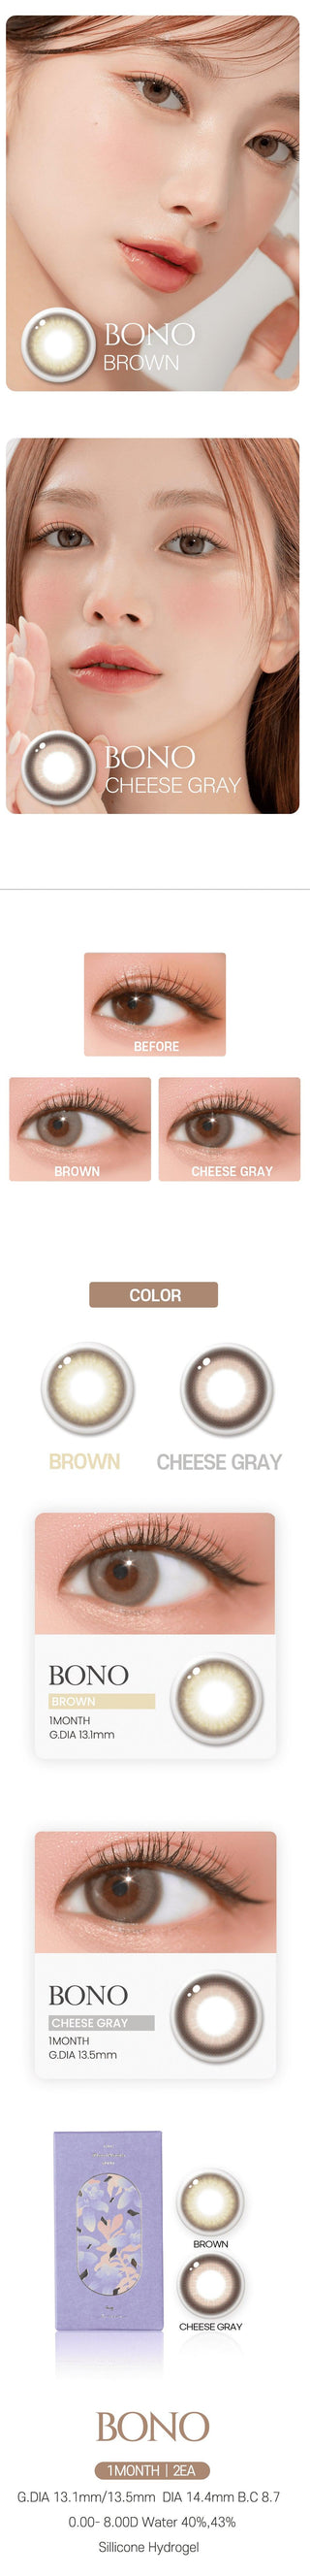 Variety of DooNoon Bono Cheese Grey contact lens colors displayed, with closeups of an eye wearing the contact lens colors, and with a model wearing the contact lens colors showing realistic eye-enlarging effect from various angles.